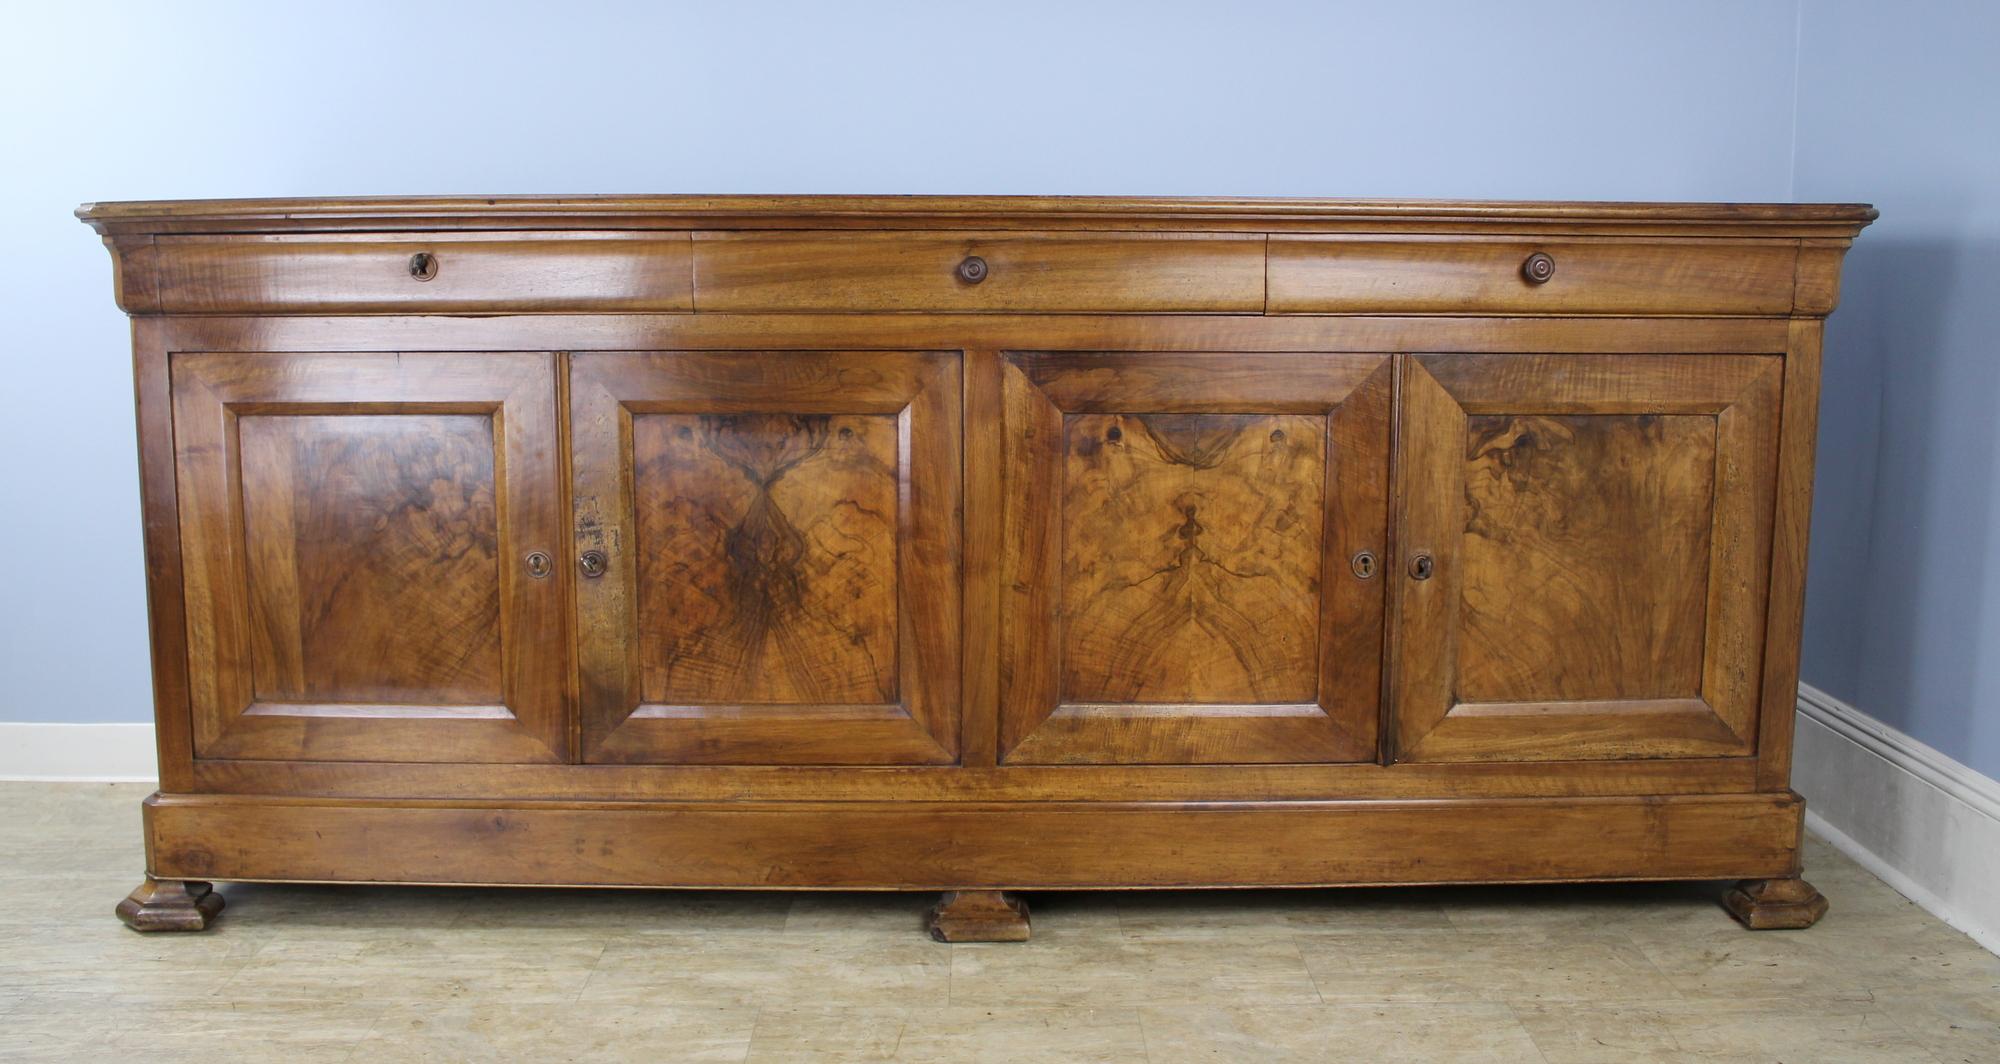 Very good, long four-door enfilade with beautiful light and dark grain highlighted by burr walnut inset panels on the doors. Glorious glow and patina. This piece combines elements of both the Louis Philippe and Directoire styles, including stylized